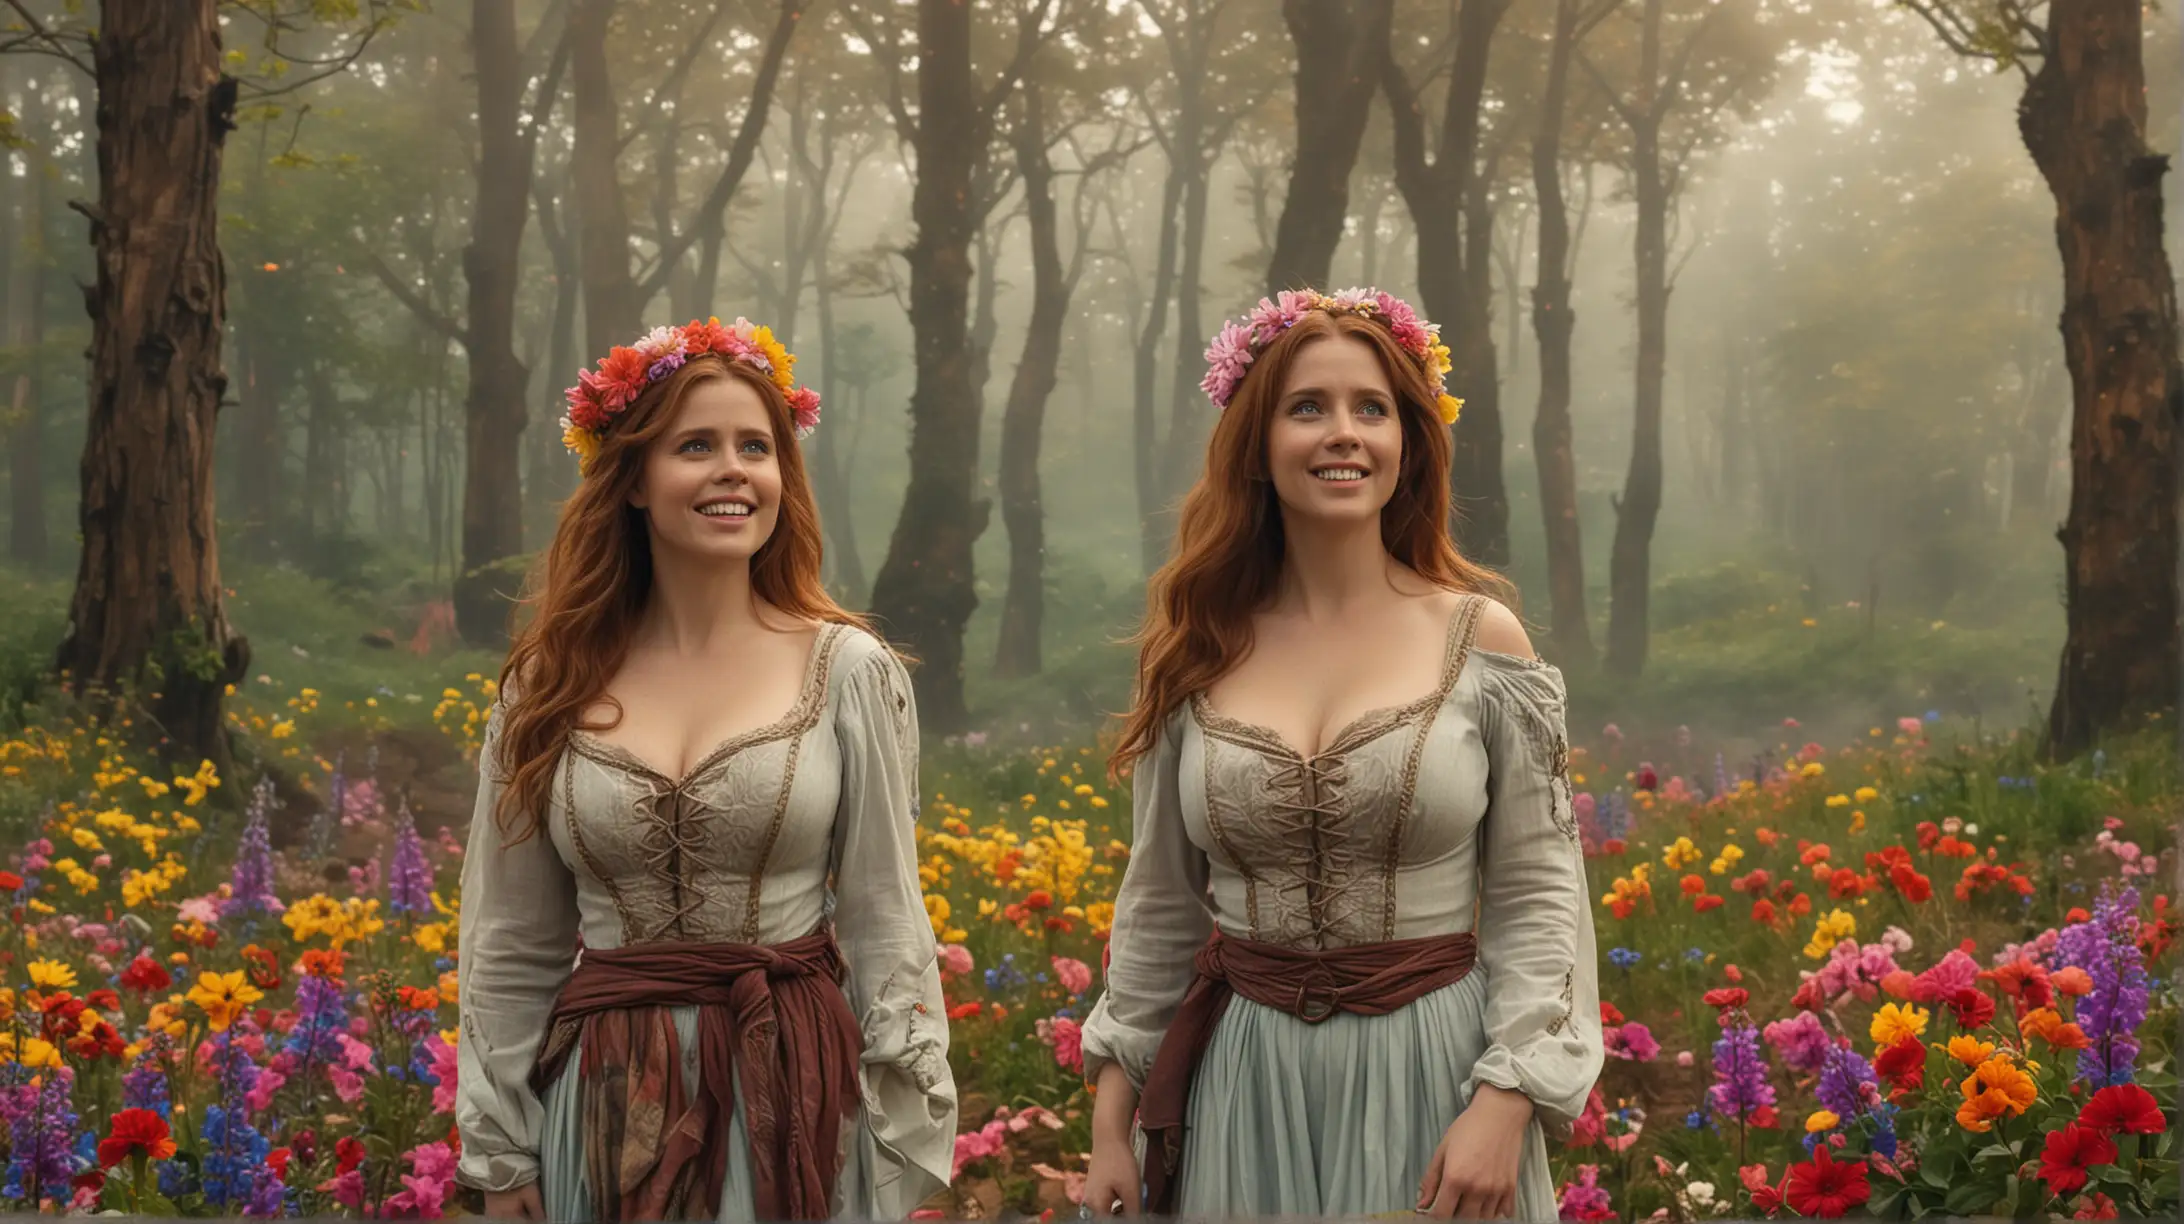 Enchantress Amy Adams Amidst Vibrant Fantasy Flora in Magical Forest